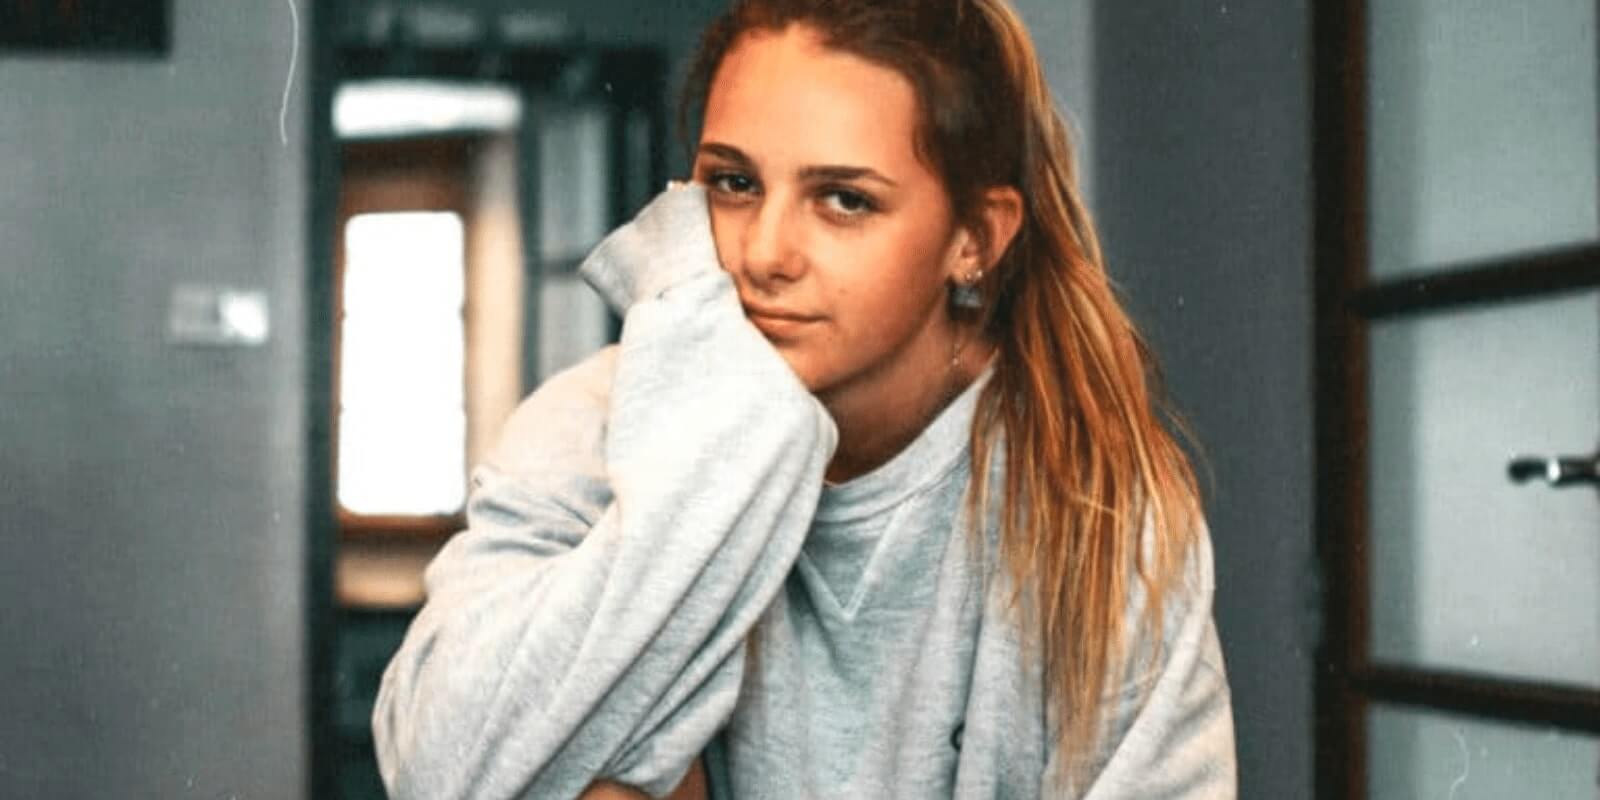 A teenage girl wearing a white sweatshirt leaning her head on her left hand